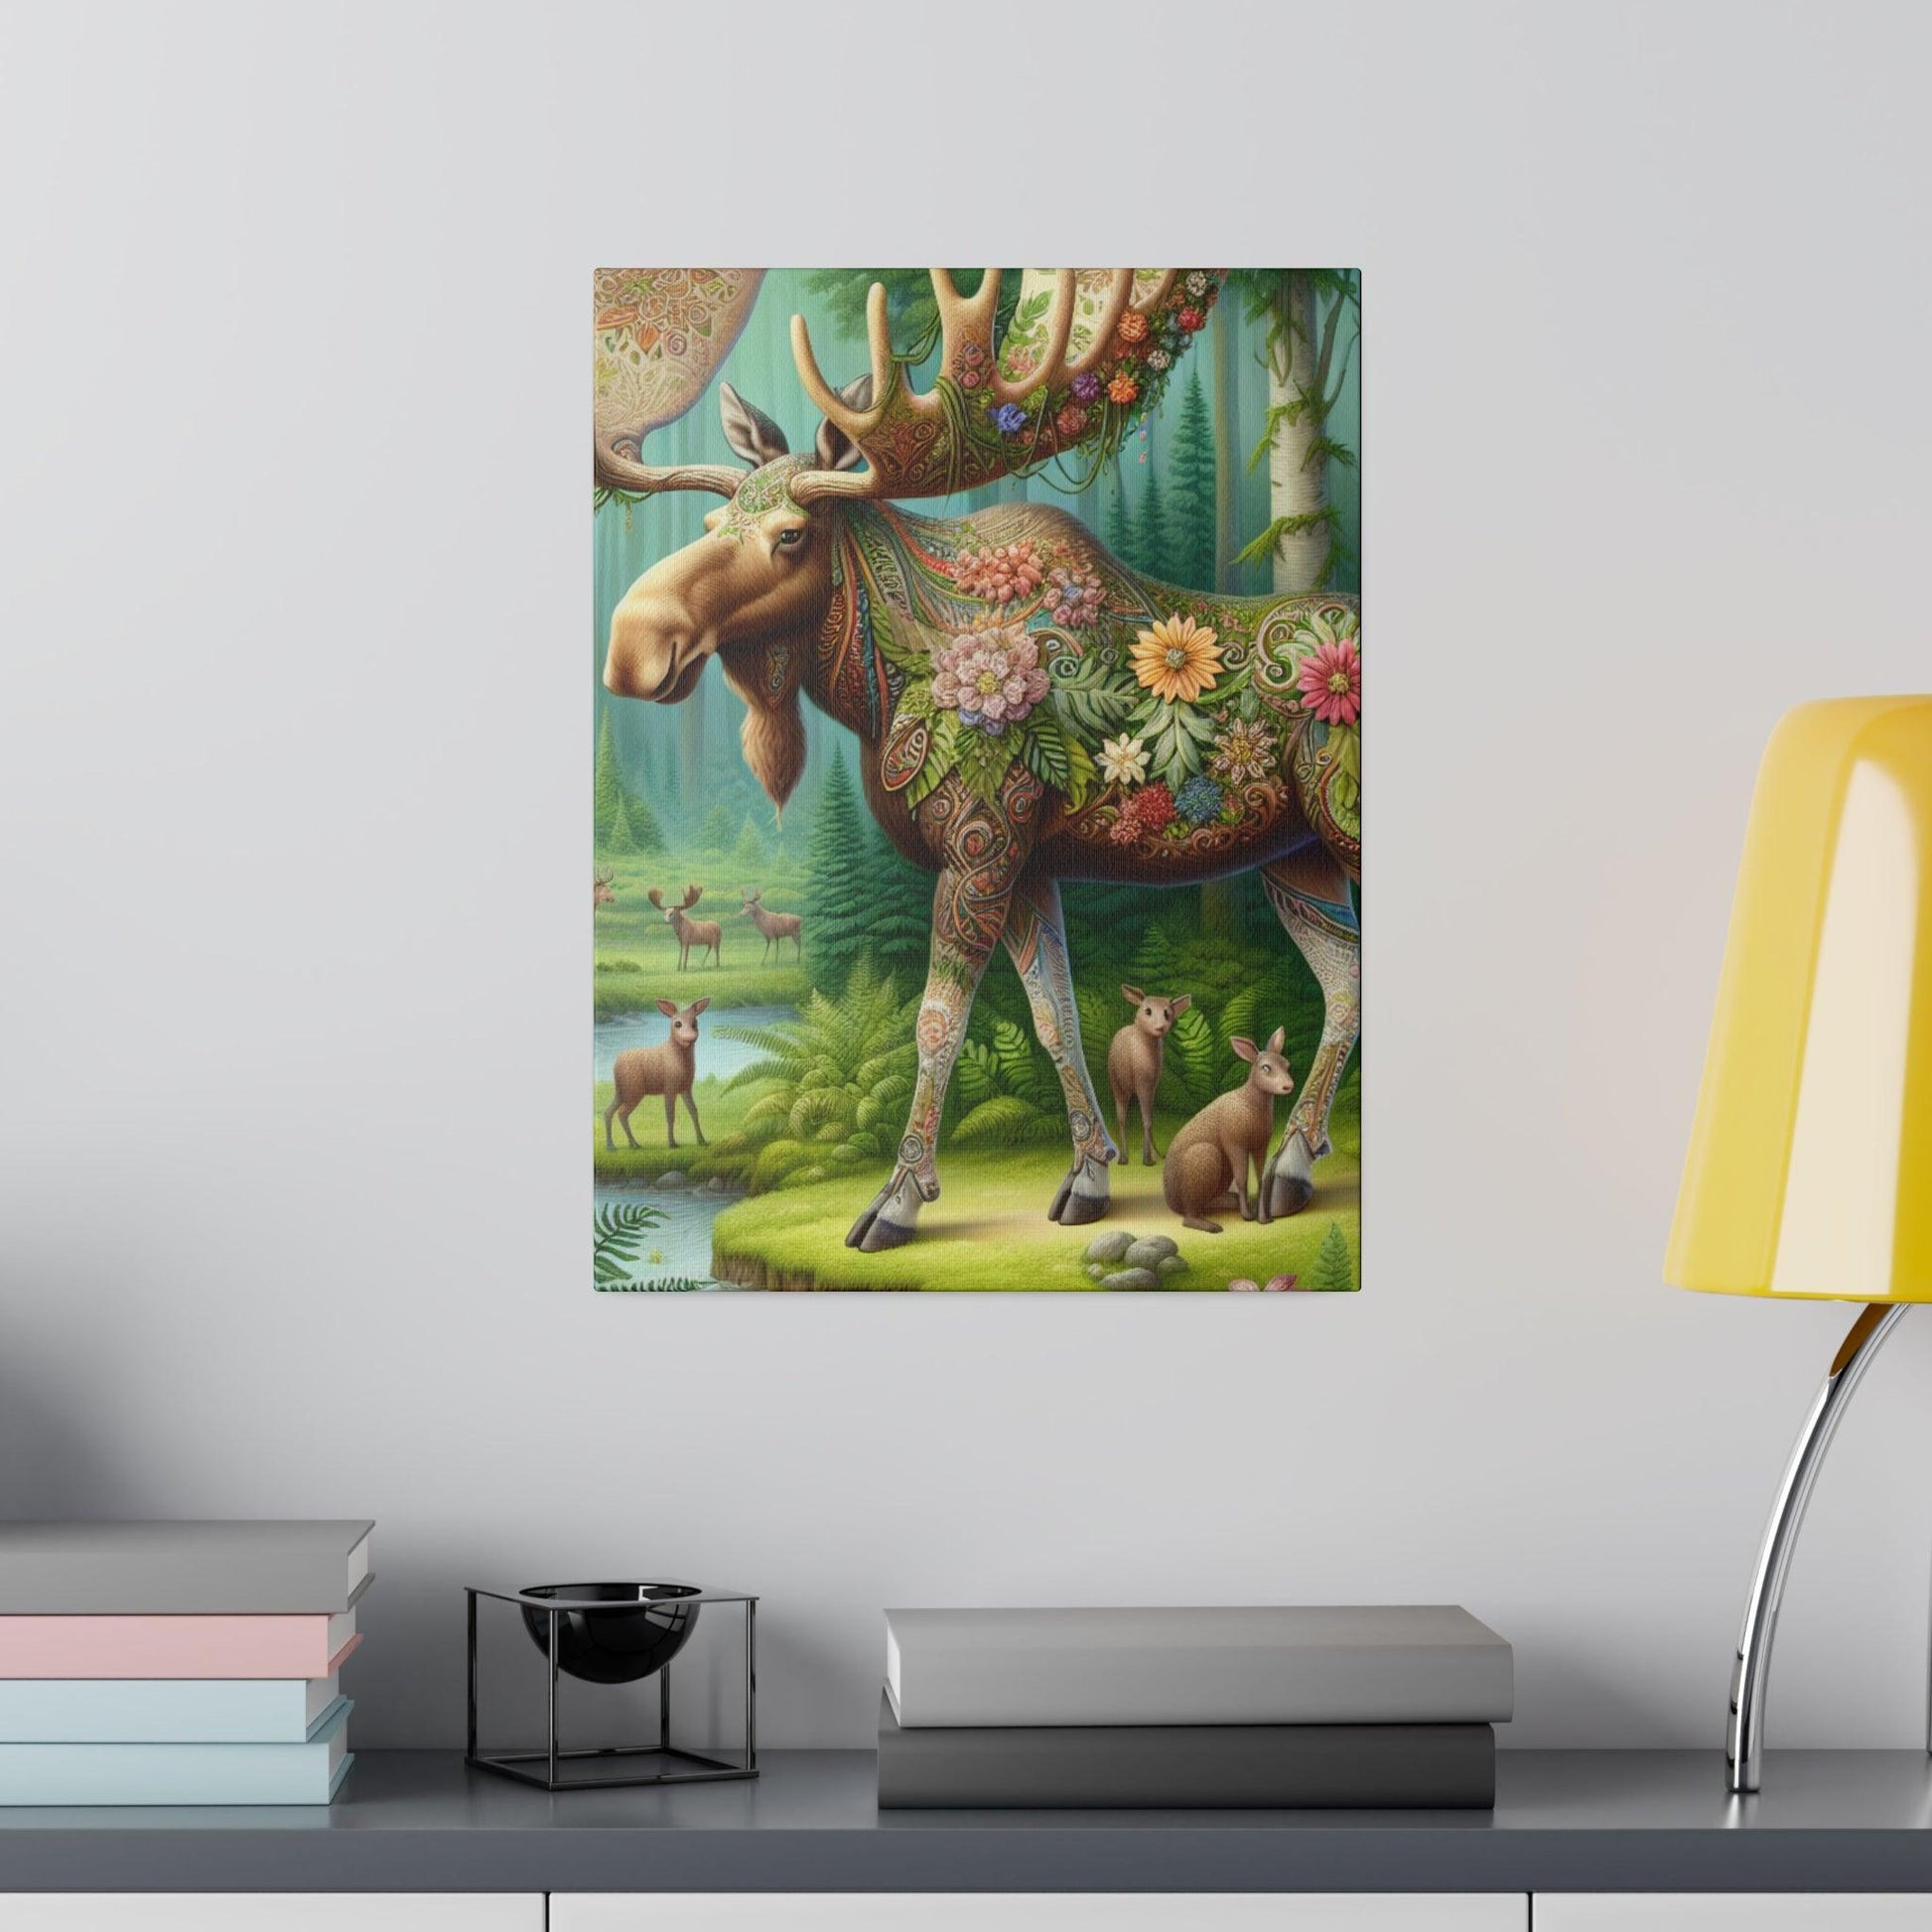 "Wilderness Majesty: Majestic Moose on Canvas Wall Art" - The Alice Gallery